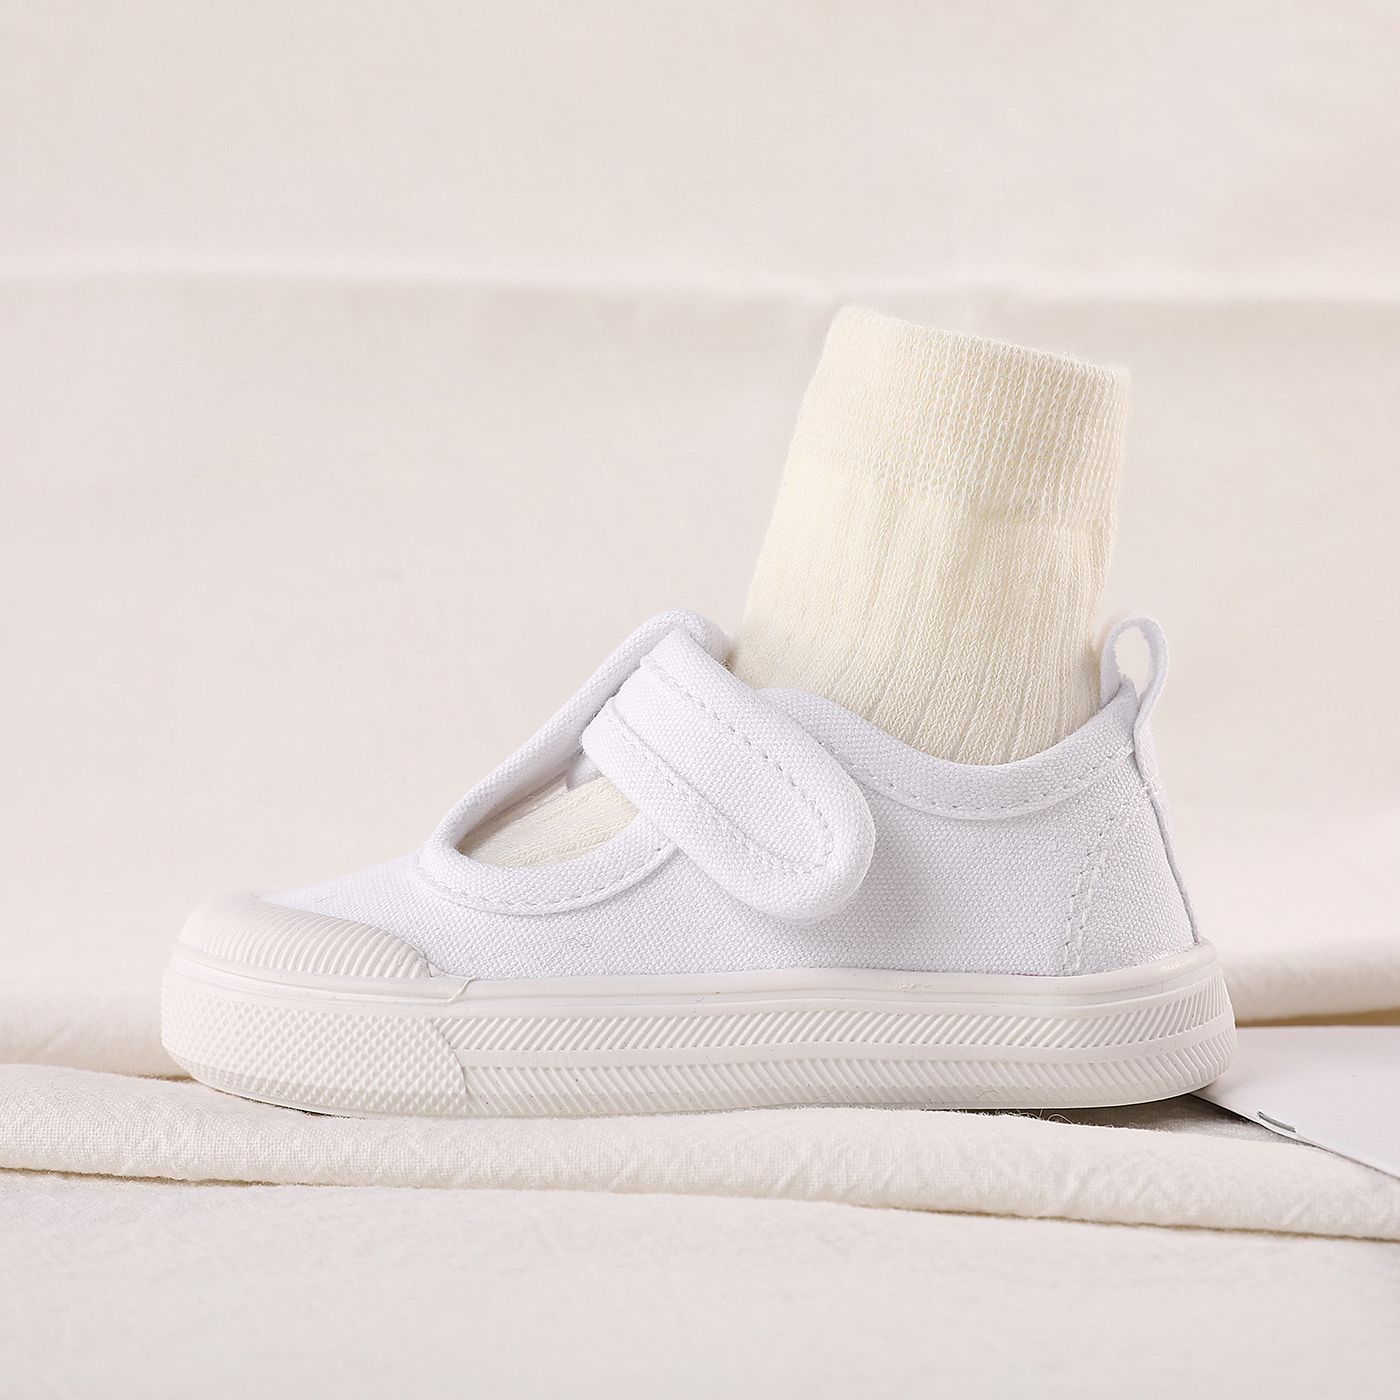 Toddler / Kid Casual White Canvas Shoes